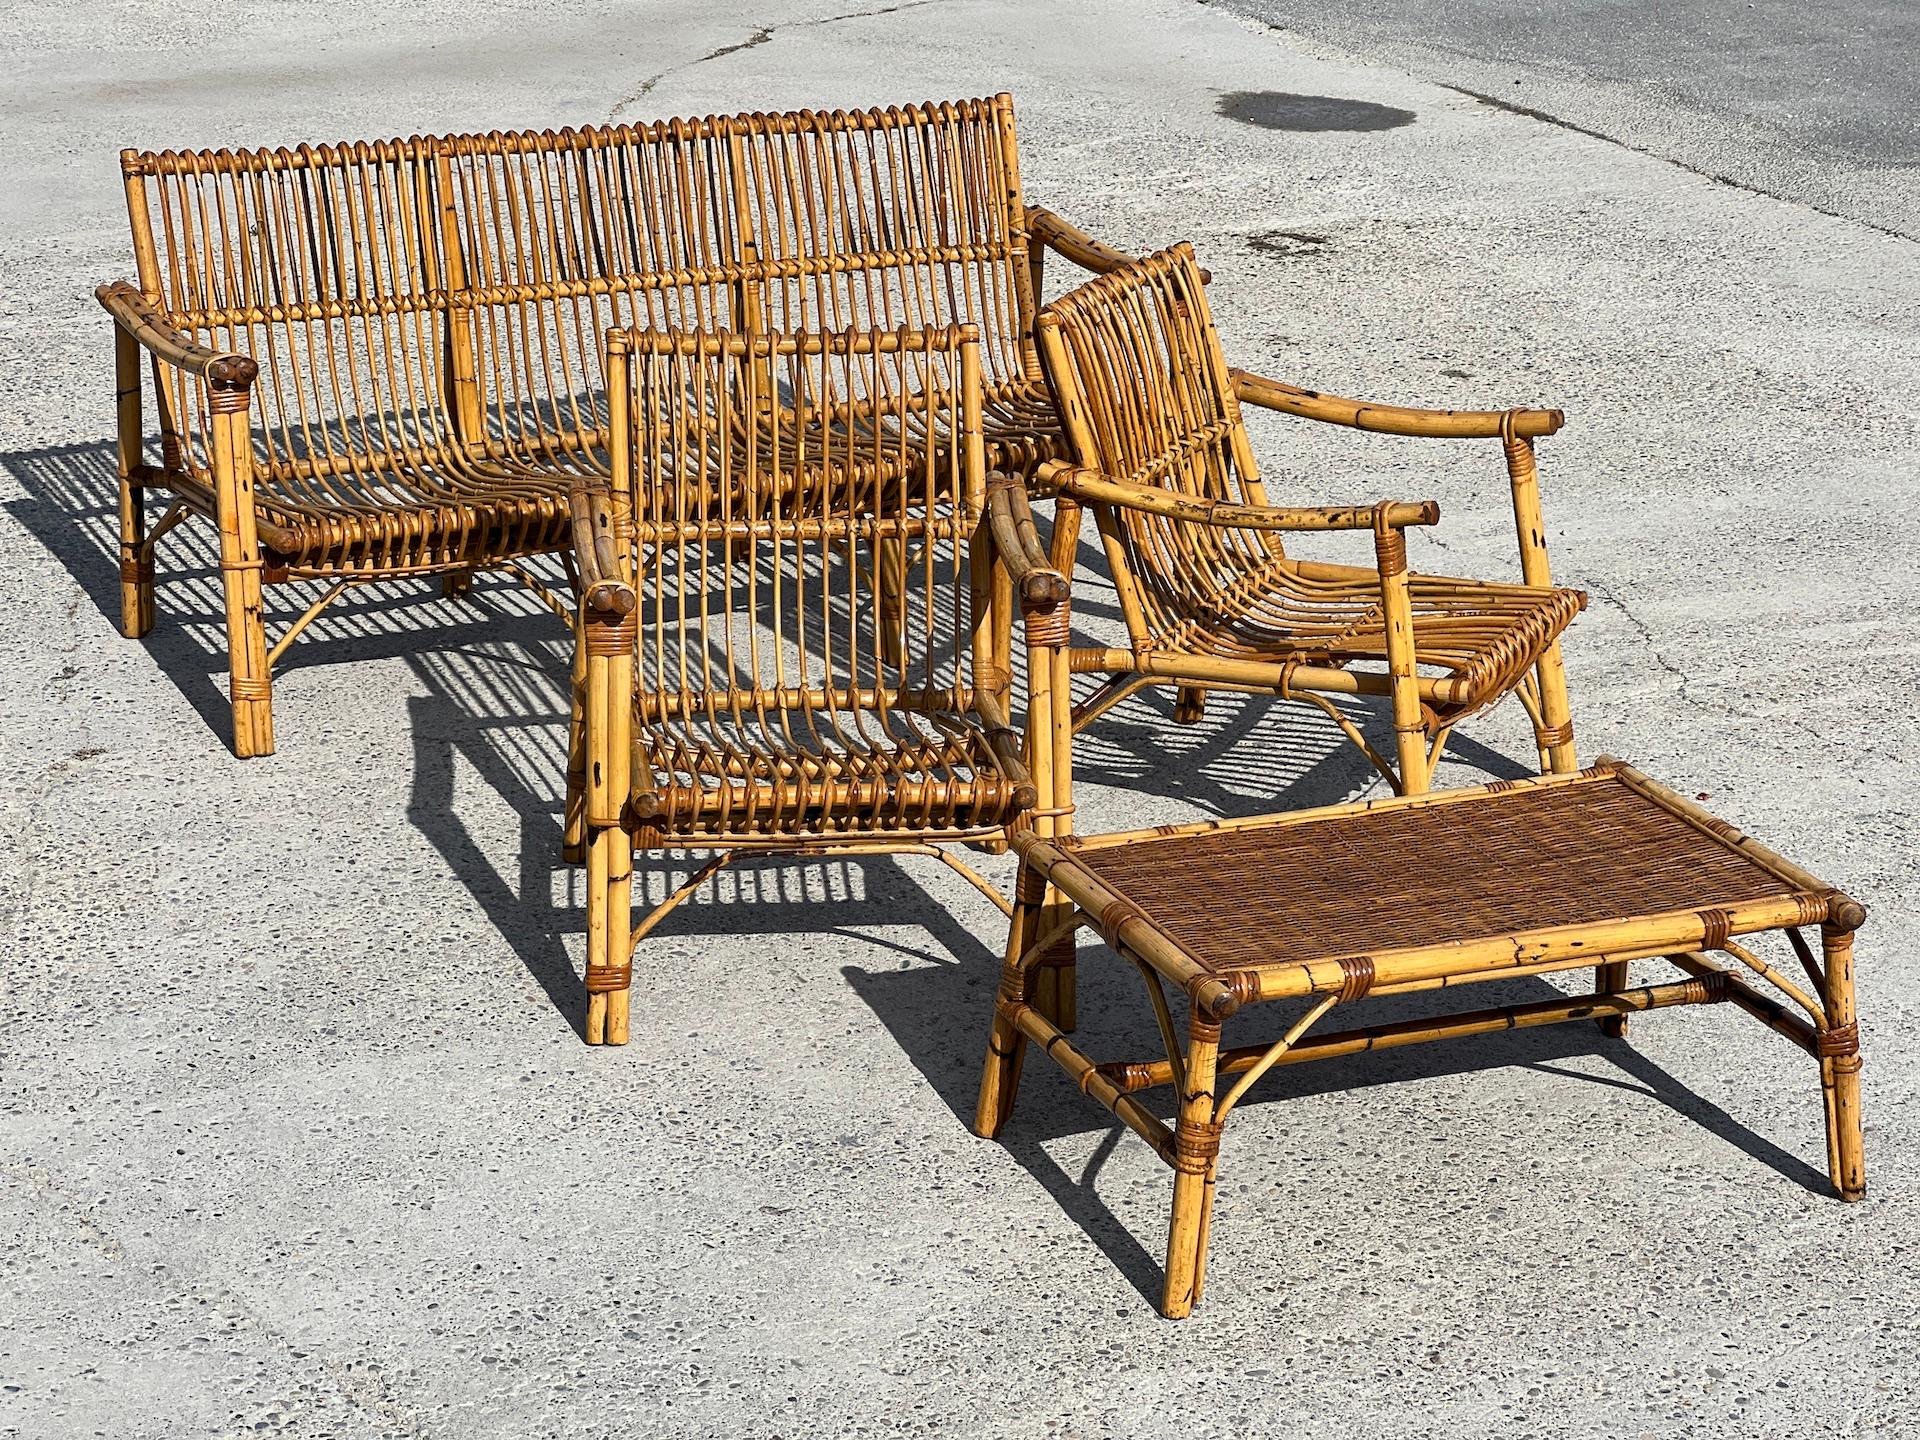 Vintage bamboo and rattan set, Italian design in the Vivaï Del Sud 1960 style consisting of : 
1 sofa: 172 x 68 x 80 cm 
2 armchairs: 68 x 68 x 80 
1 coffee table 
All in excellent condition.